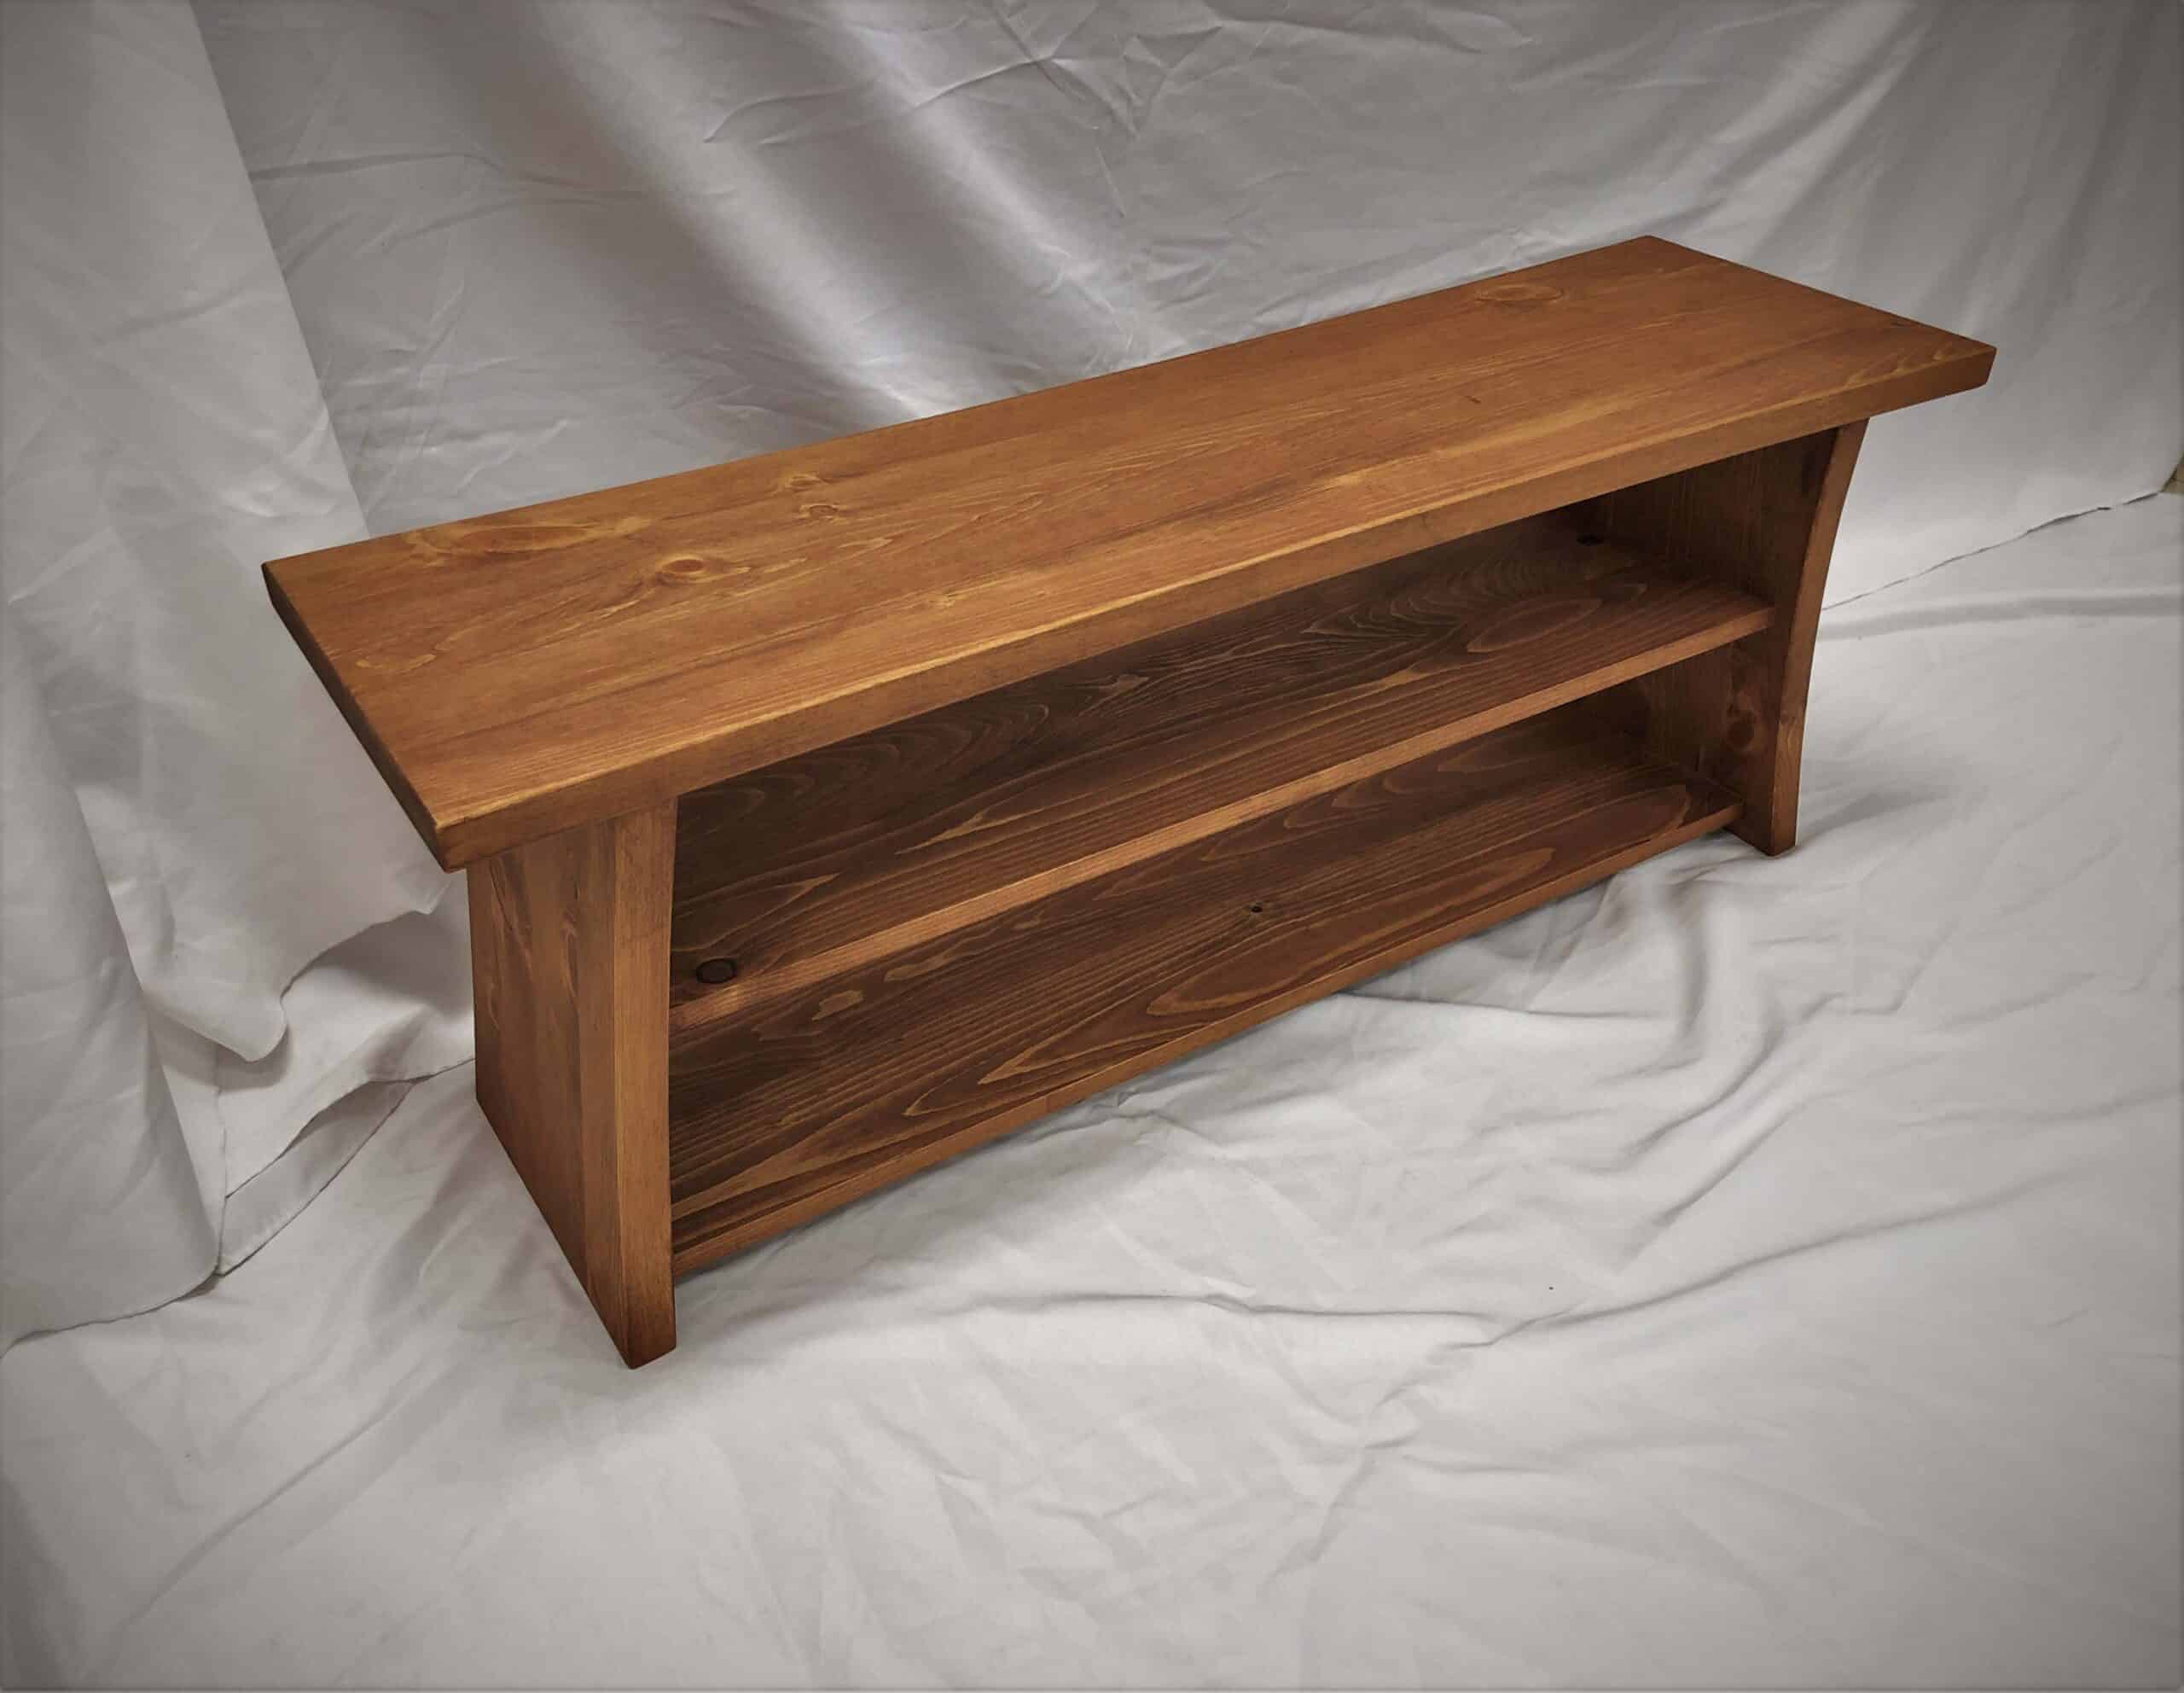 Featured image for “Rustic Pine Shoe-Storage Bench”